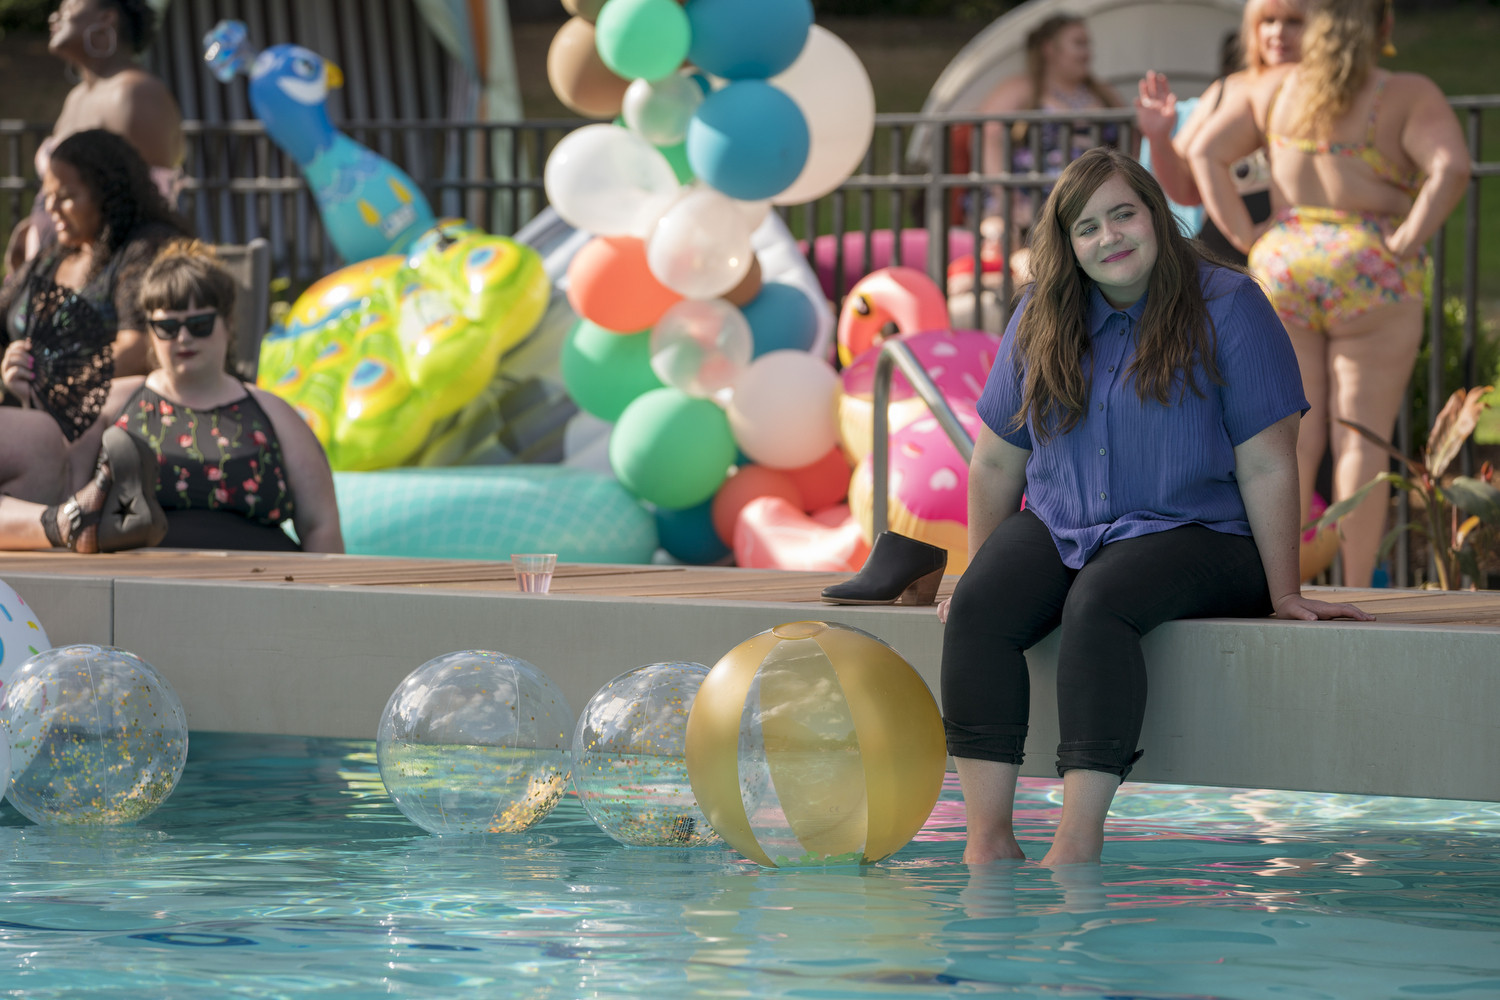 Aidy Bryant with her legs in the pool